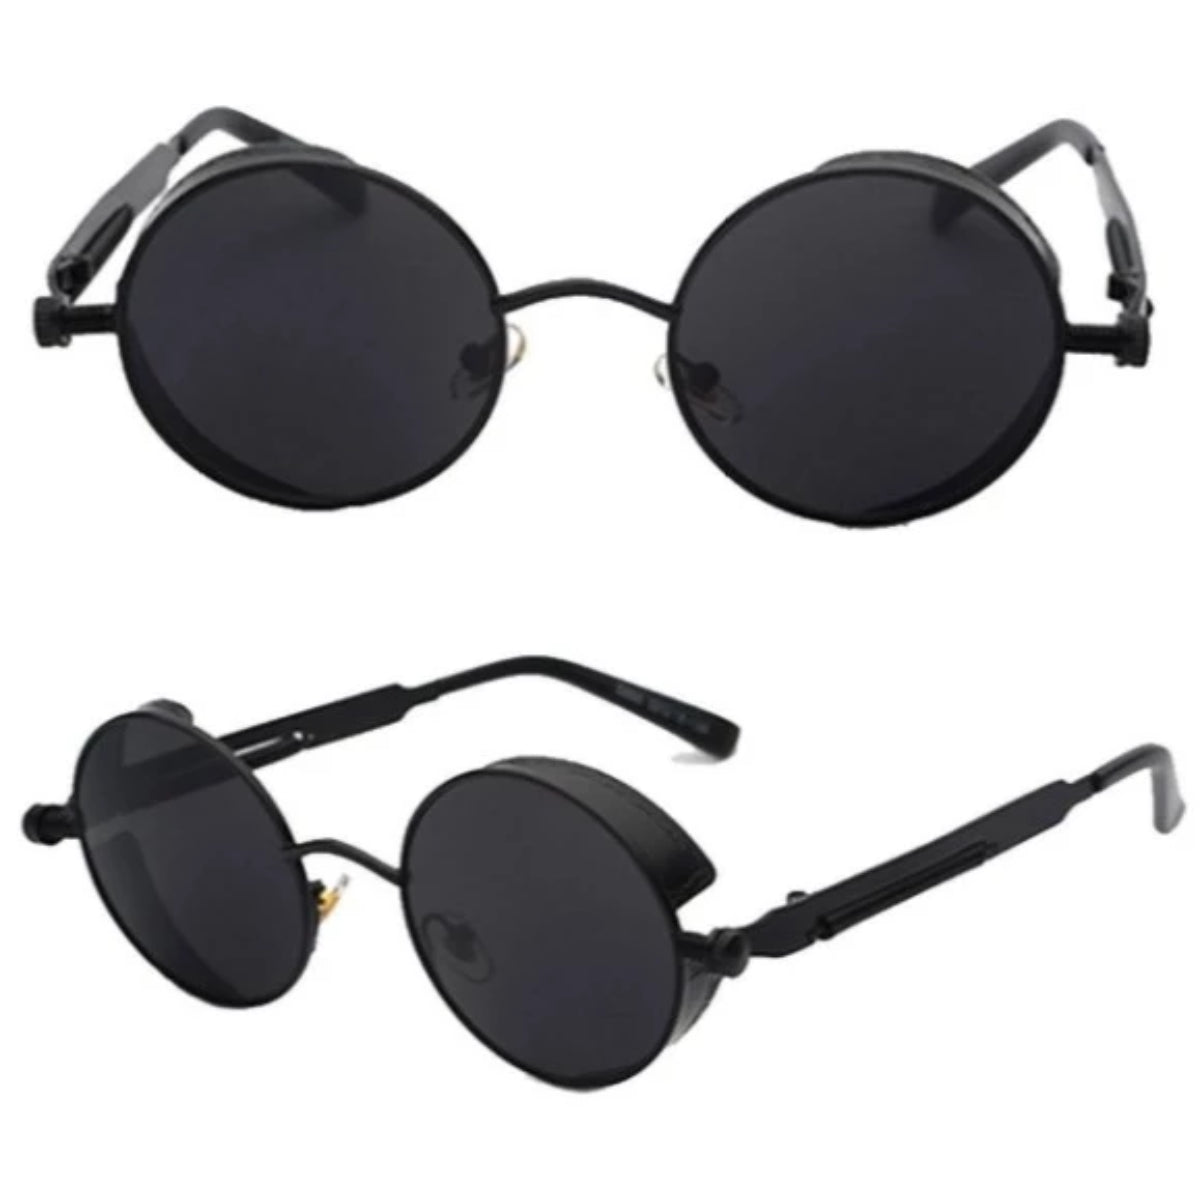 A pair of Rebel Steampunk Sunglasses plus Free 1% Er Ring Bundle that exude a rebellious and biker vibe while offering protection with their black lenses.